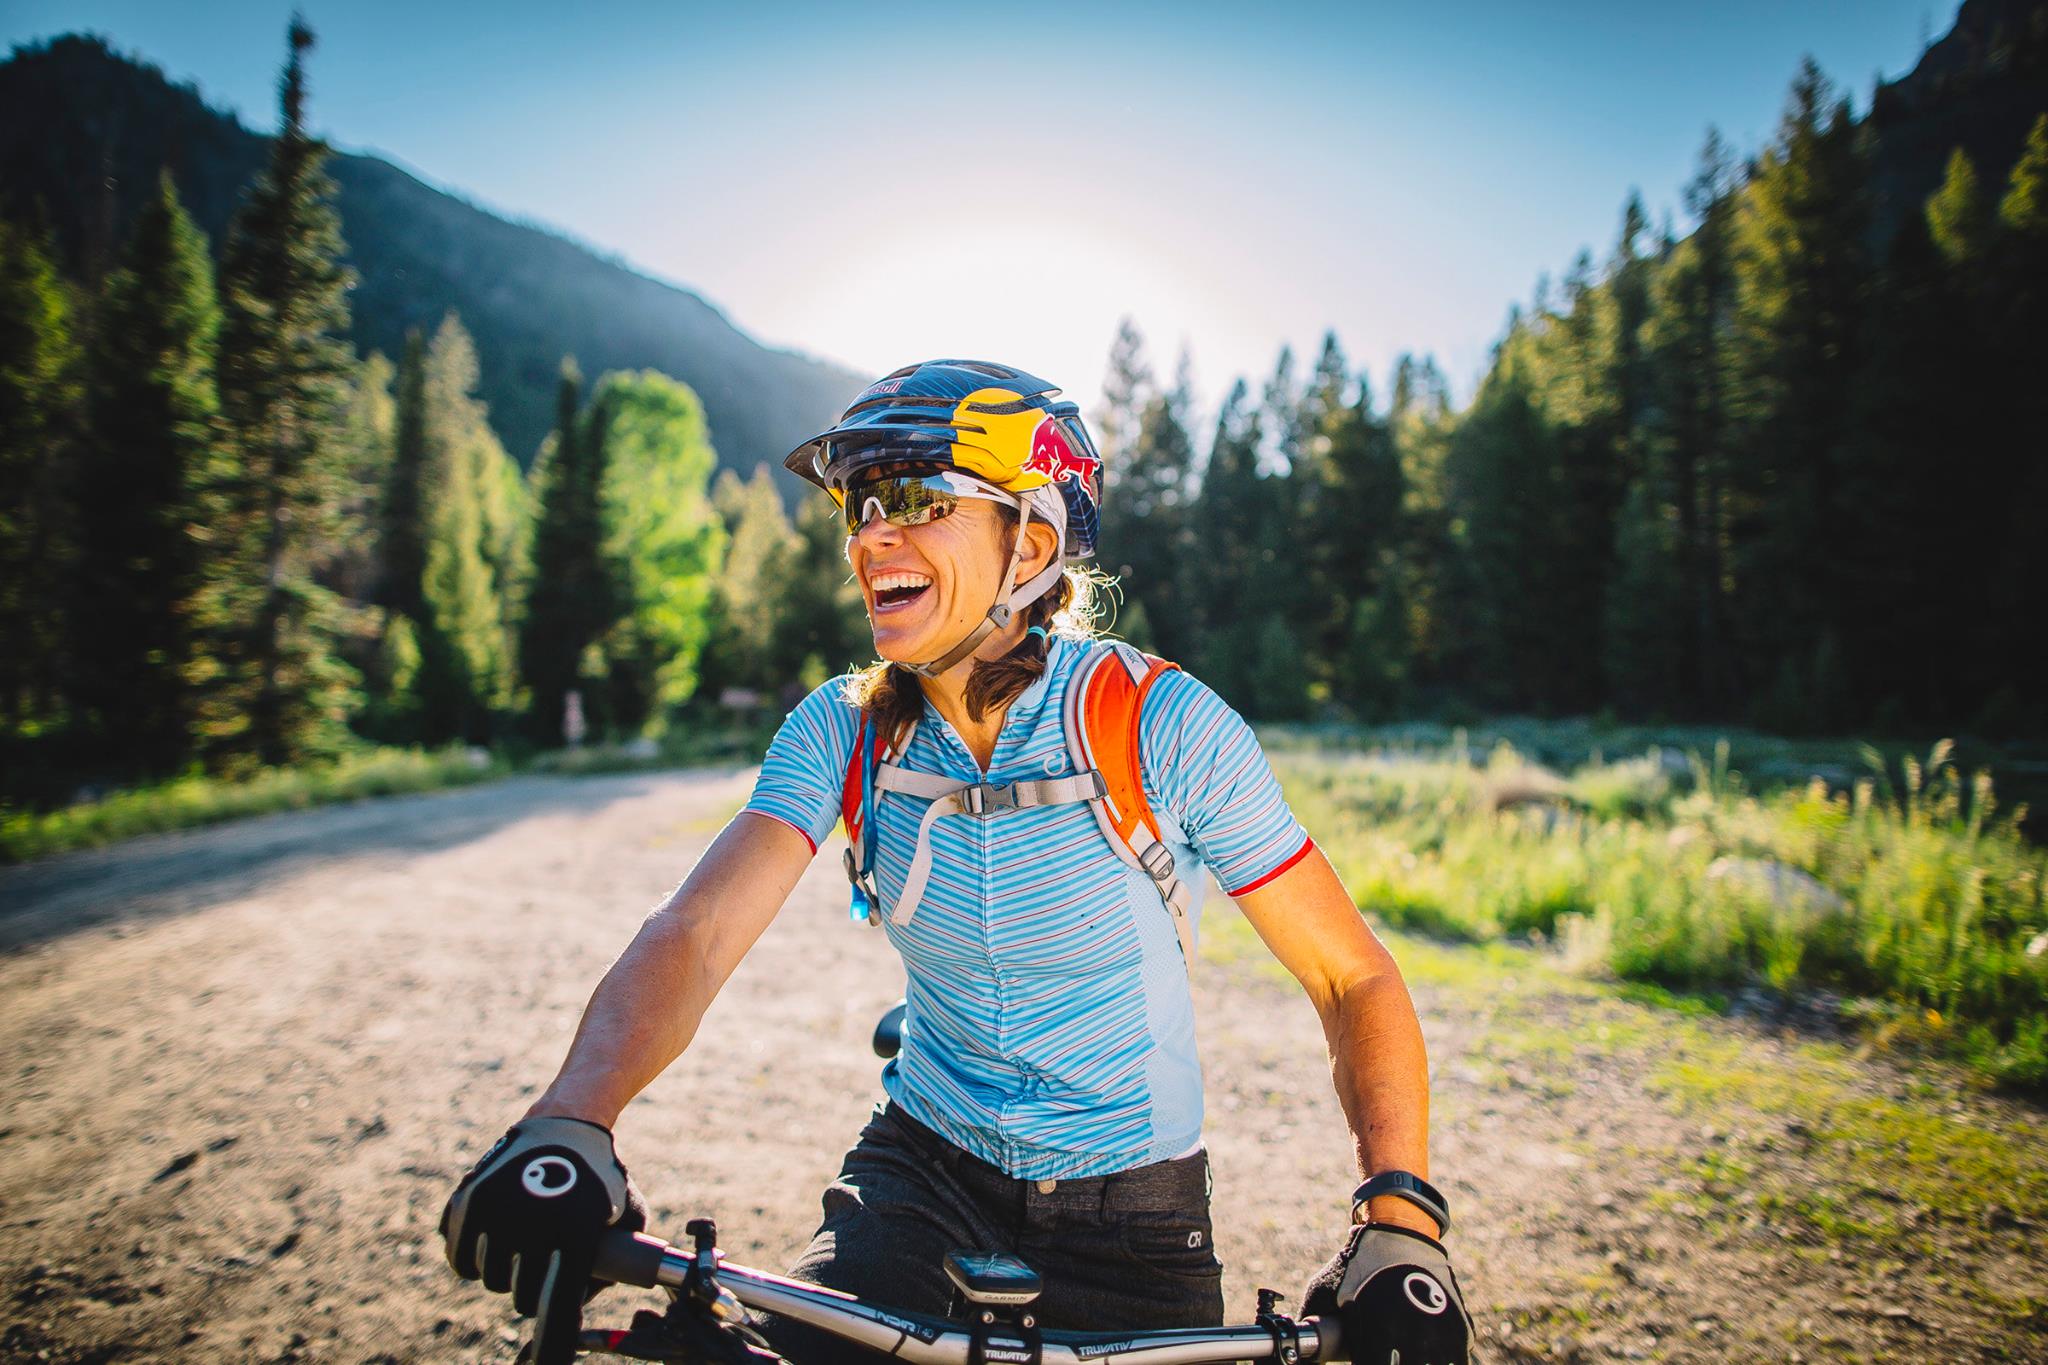 WomenMTB Dinner with Red athlete Rebecca Rusch